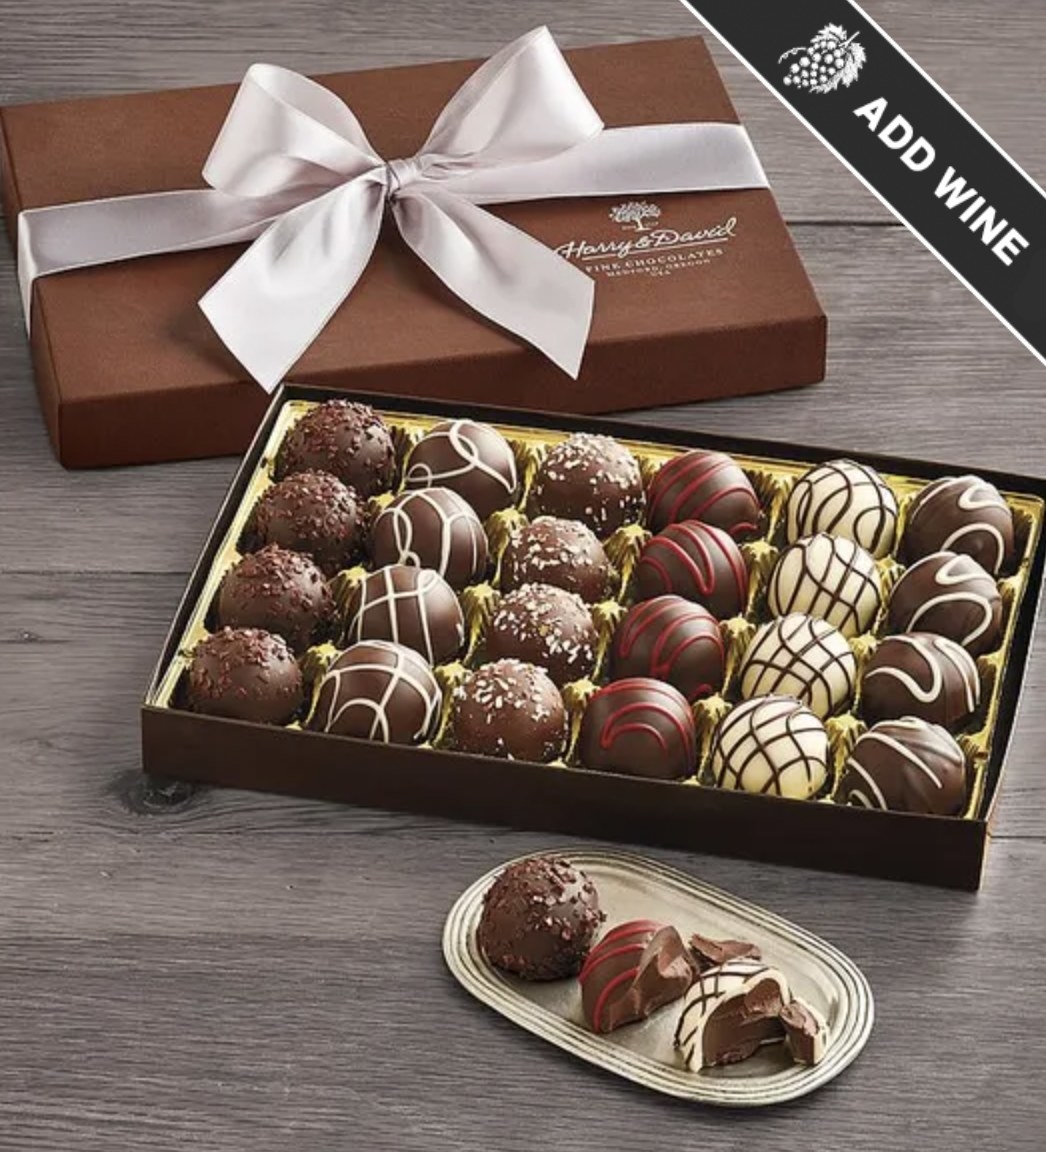 The open box of 24 truffles with three set out on a plate